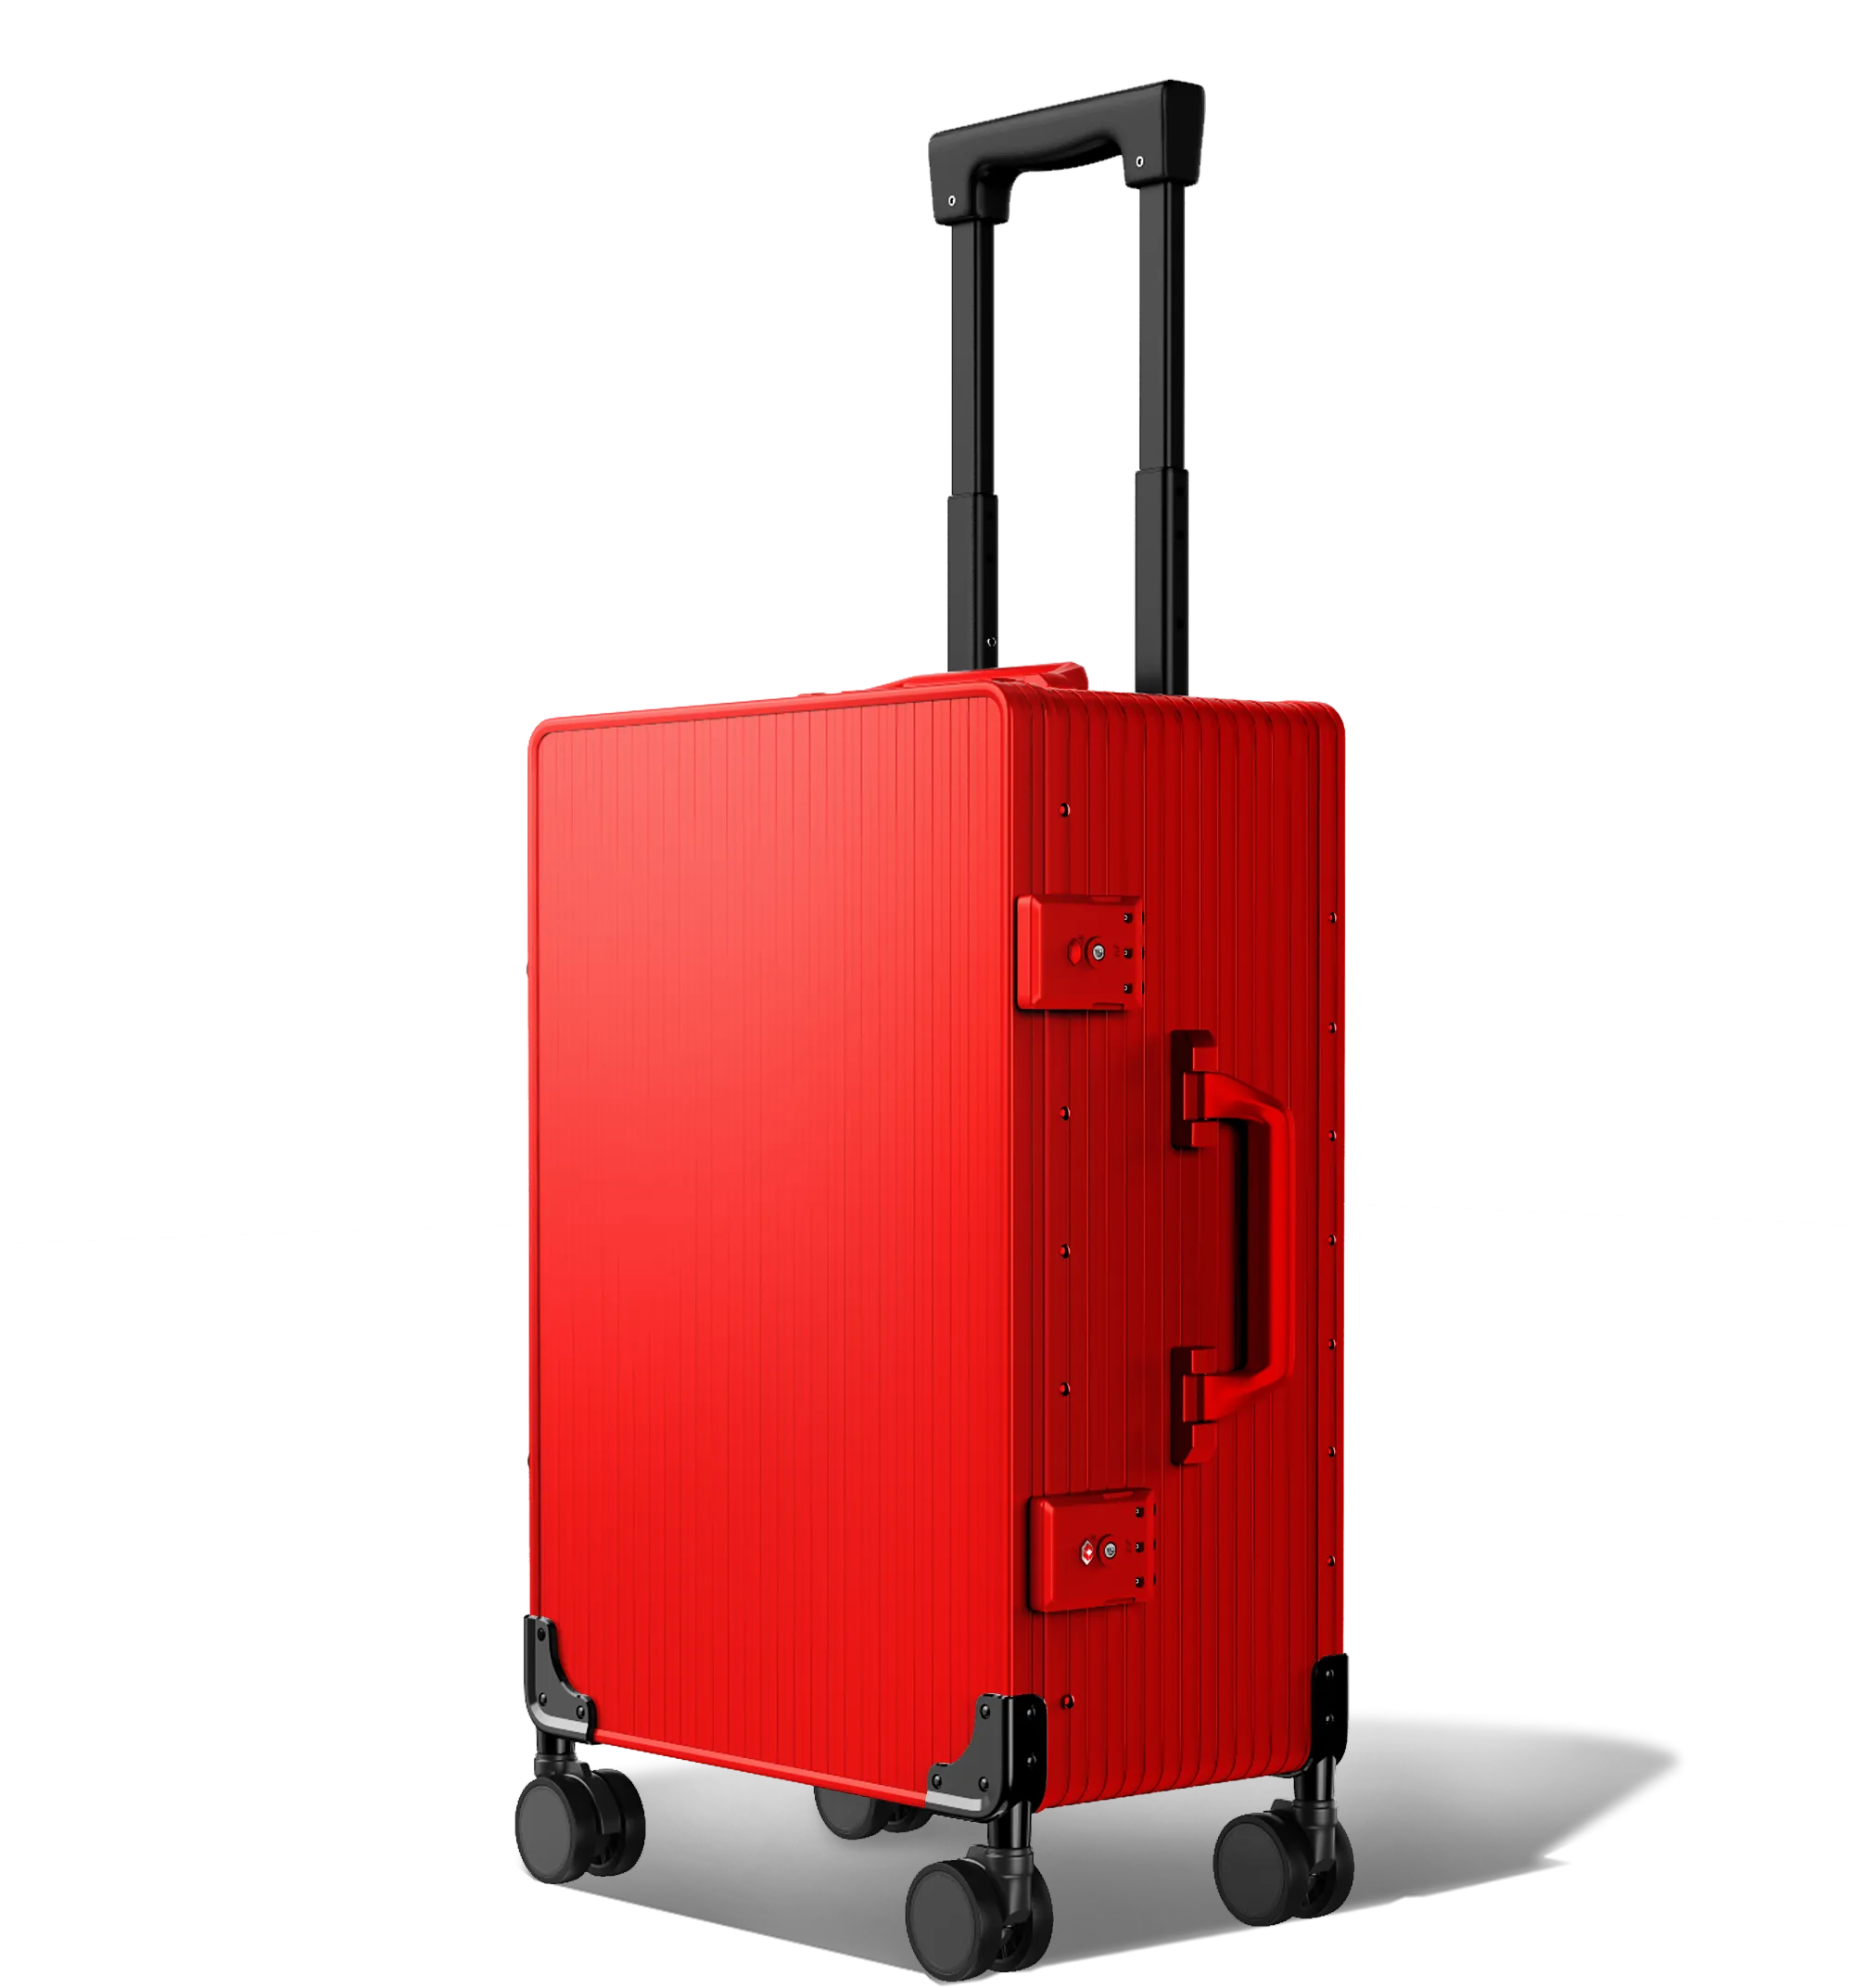 A three-quarter view of an upright Cabin in 56/20 red hard-shell aluminium Luggage with a textured surface, featuring an extended telescopic handle, a side handle, and four spinner wheels, set against a white background.